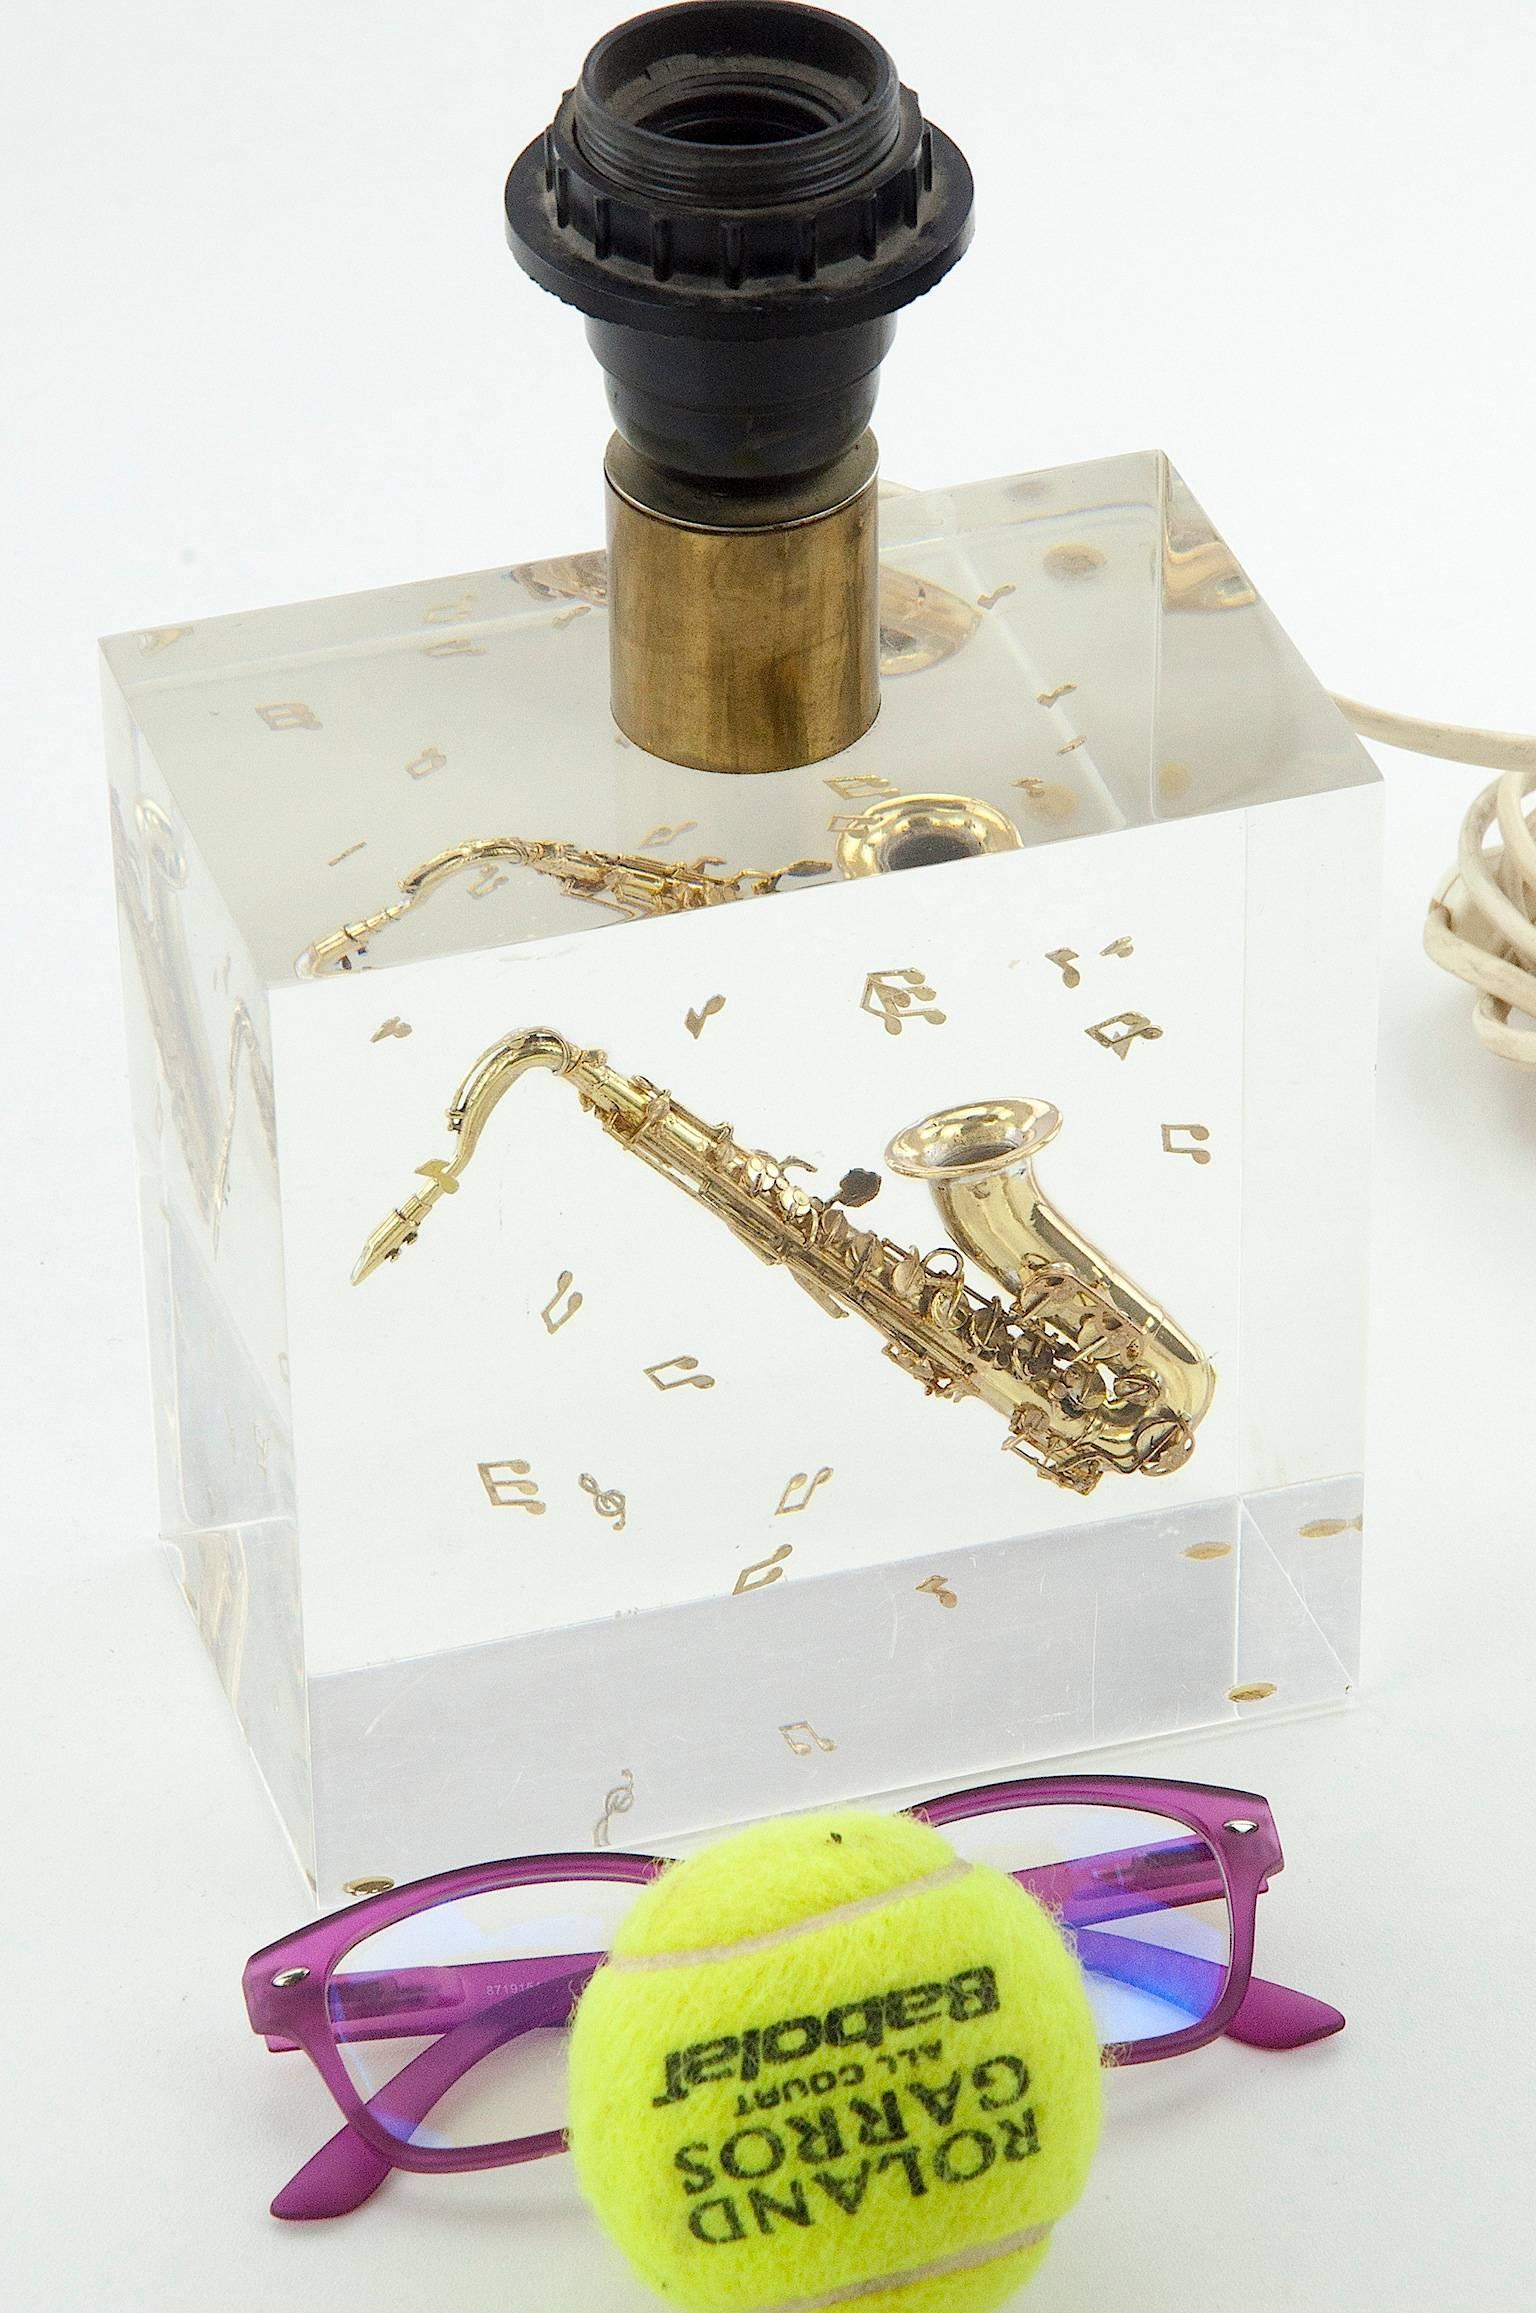 Late 20th Century Resin Table Lamp with an Inclusion of a Saxophone